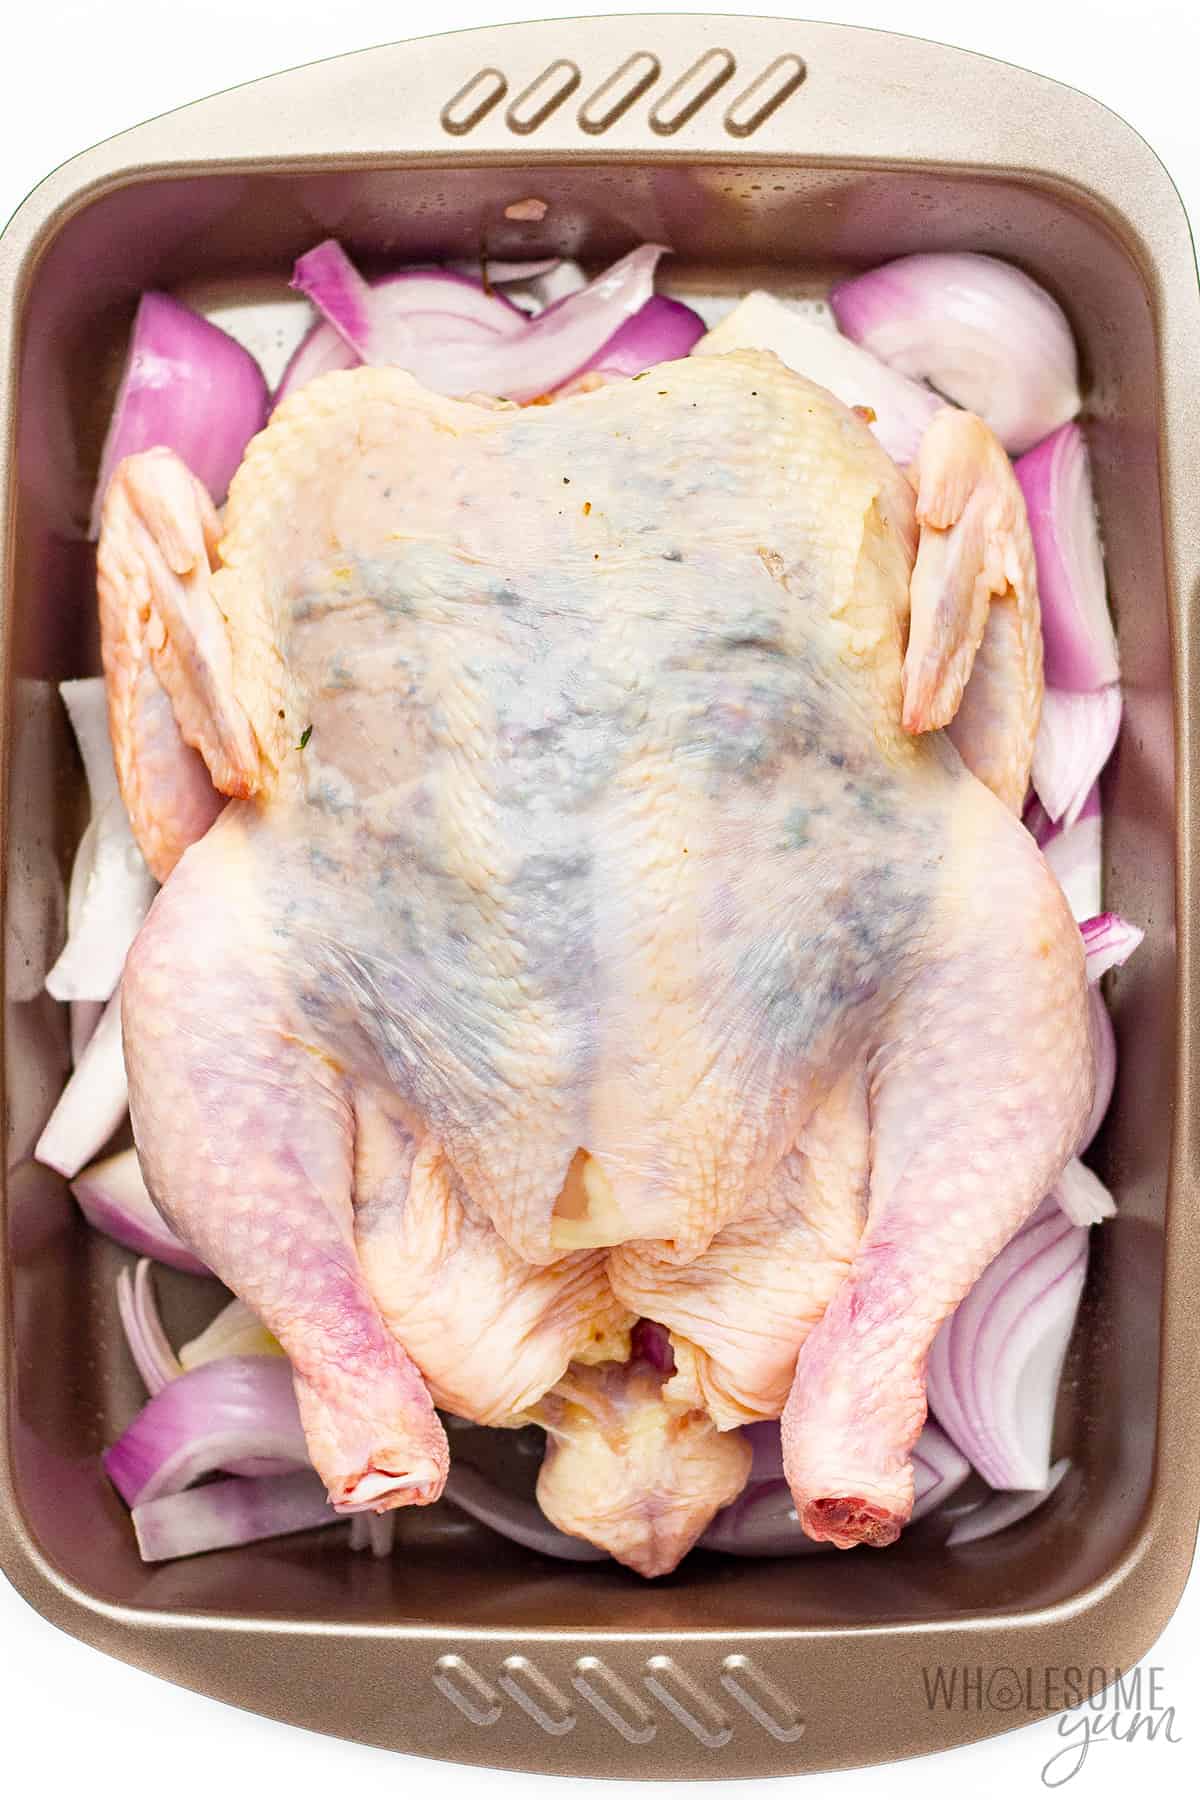 Chicken and onions in roasting pan.